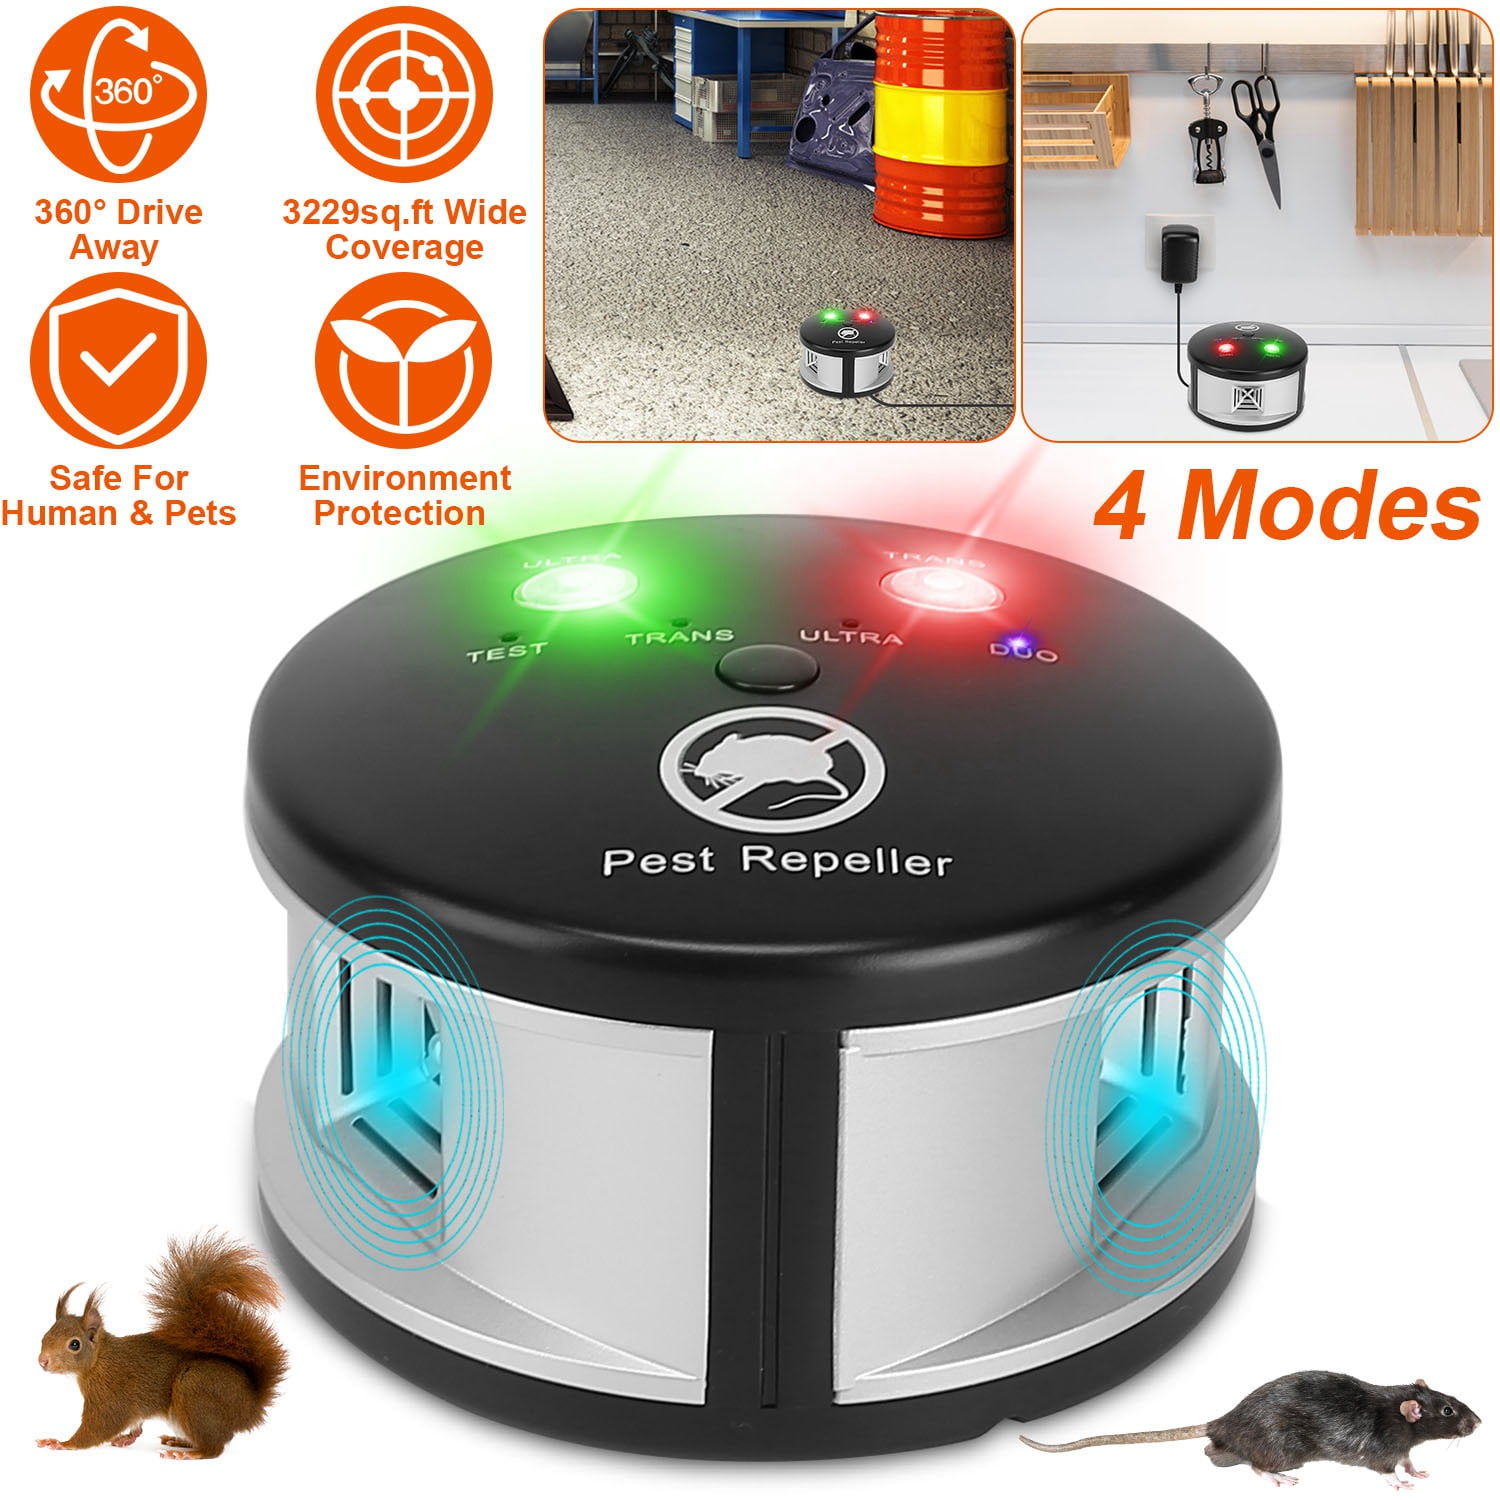 Bird-X Transonic Pro Electronic Ultrasonic Pest Repeller for Mice and  Insects, 3,000 sq. ft. at Tractor Supply Co.